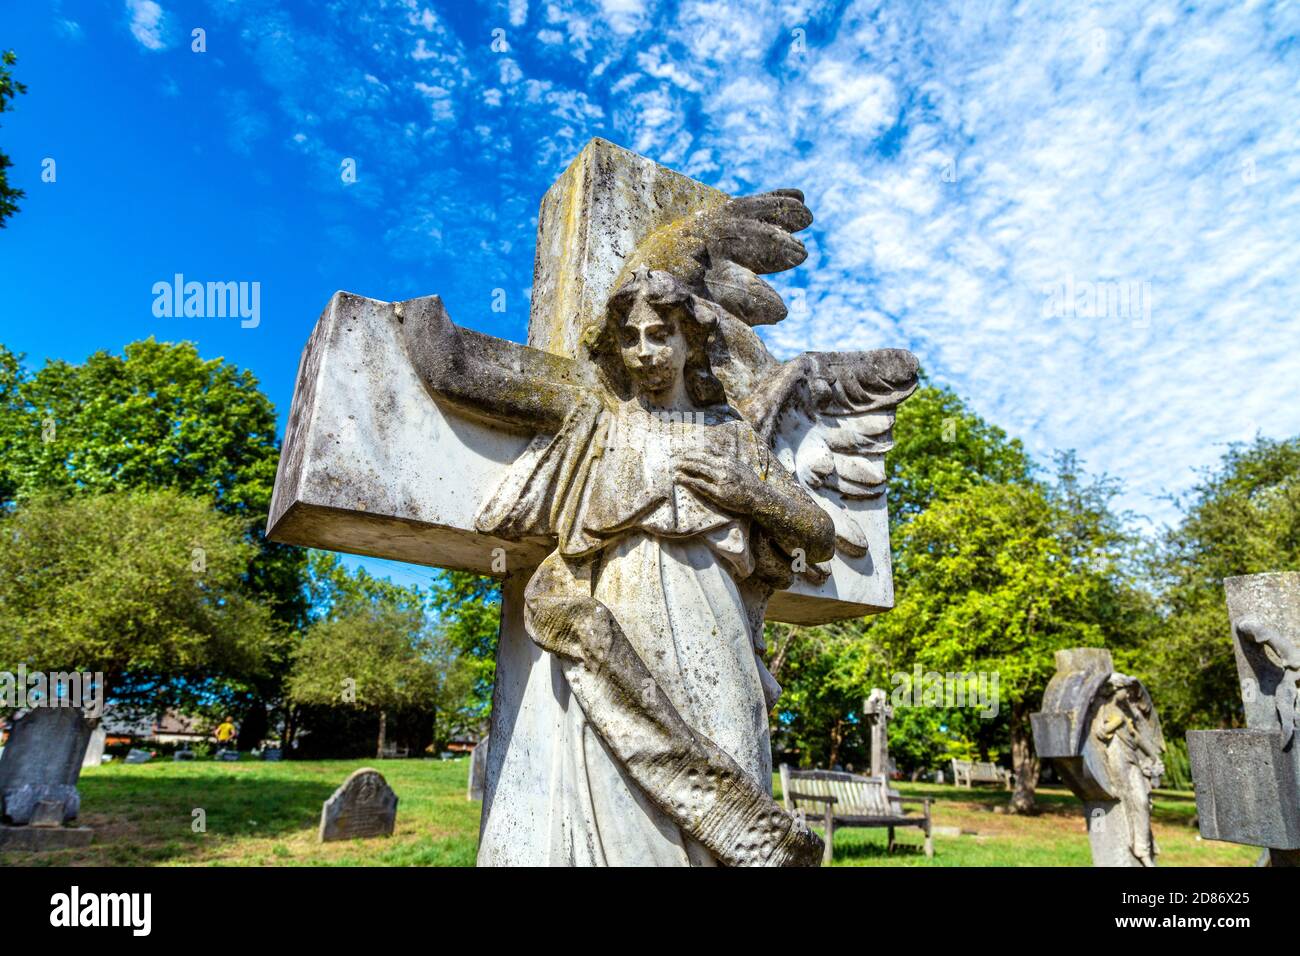 Sculpture of angel on a cross at West Norwood Cemetery, London, UK Stock Photo